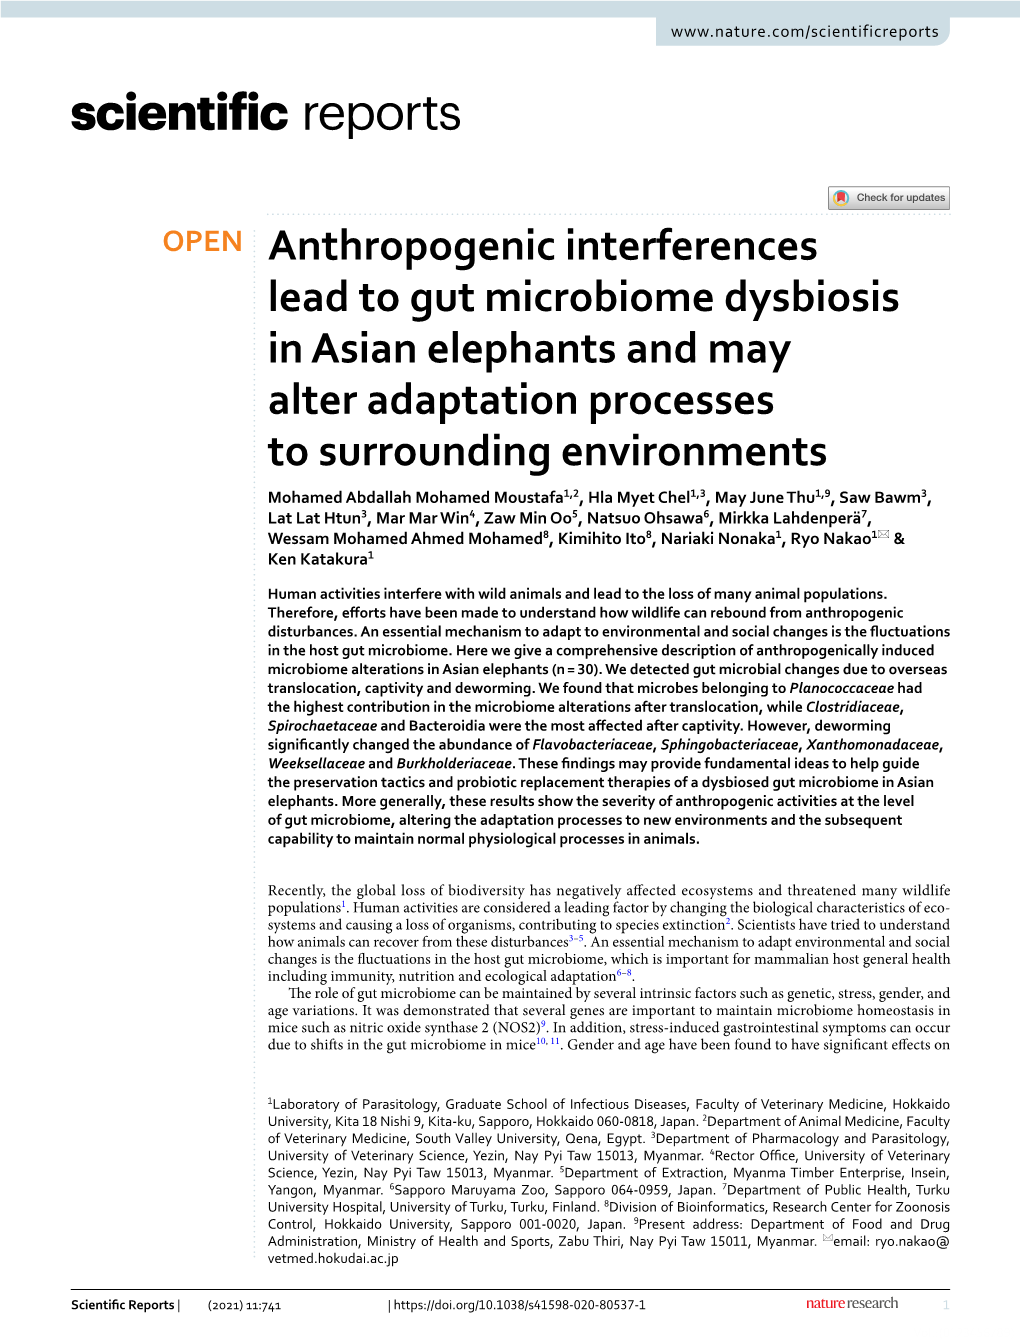 Anthropogenic Interferences Lead to Gut Microbiome Dysbiosis in Asian